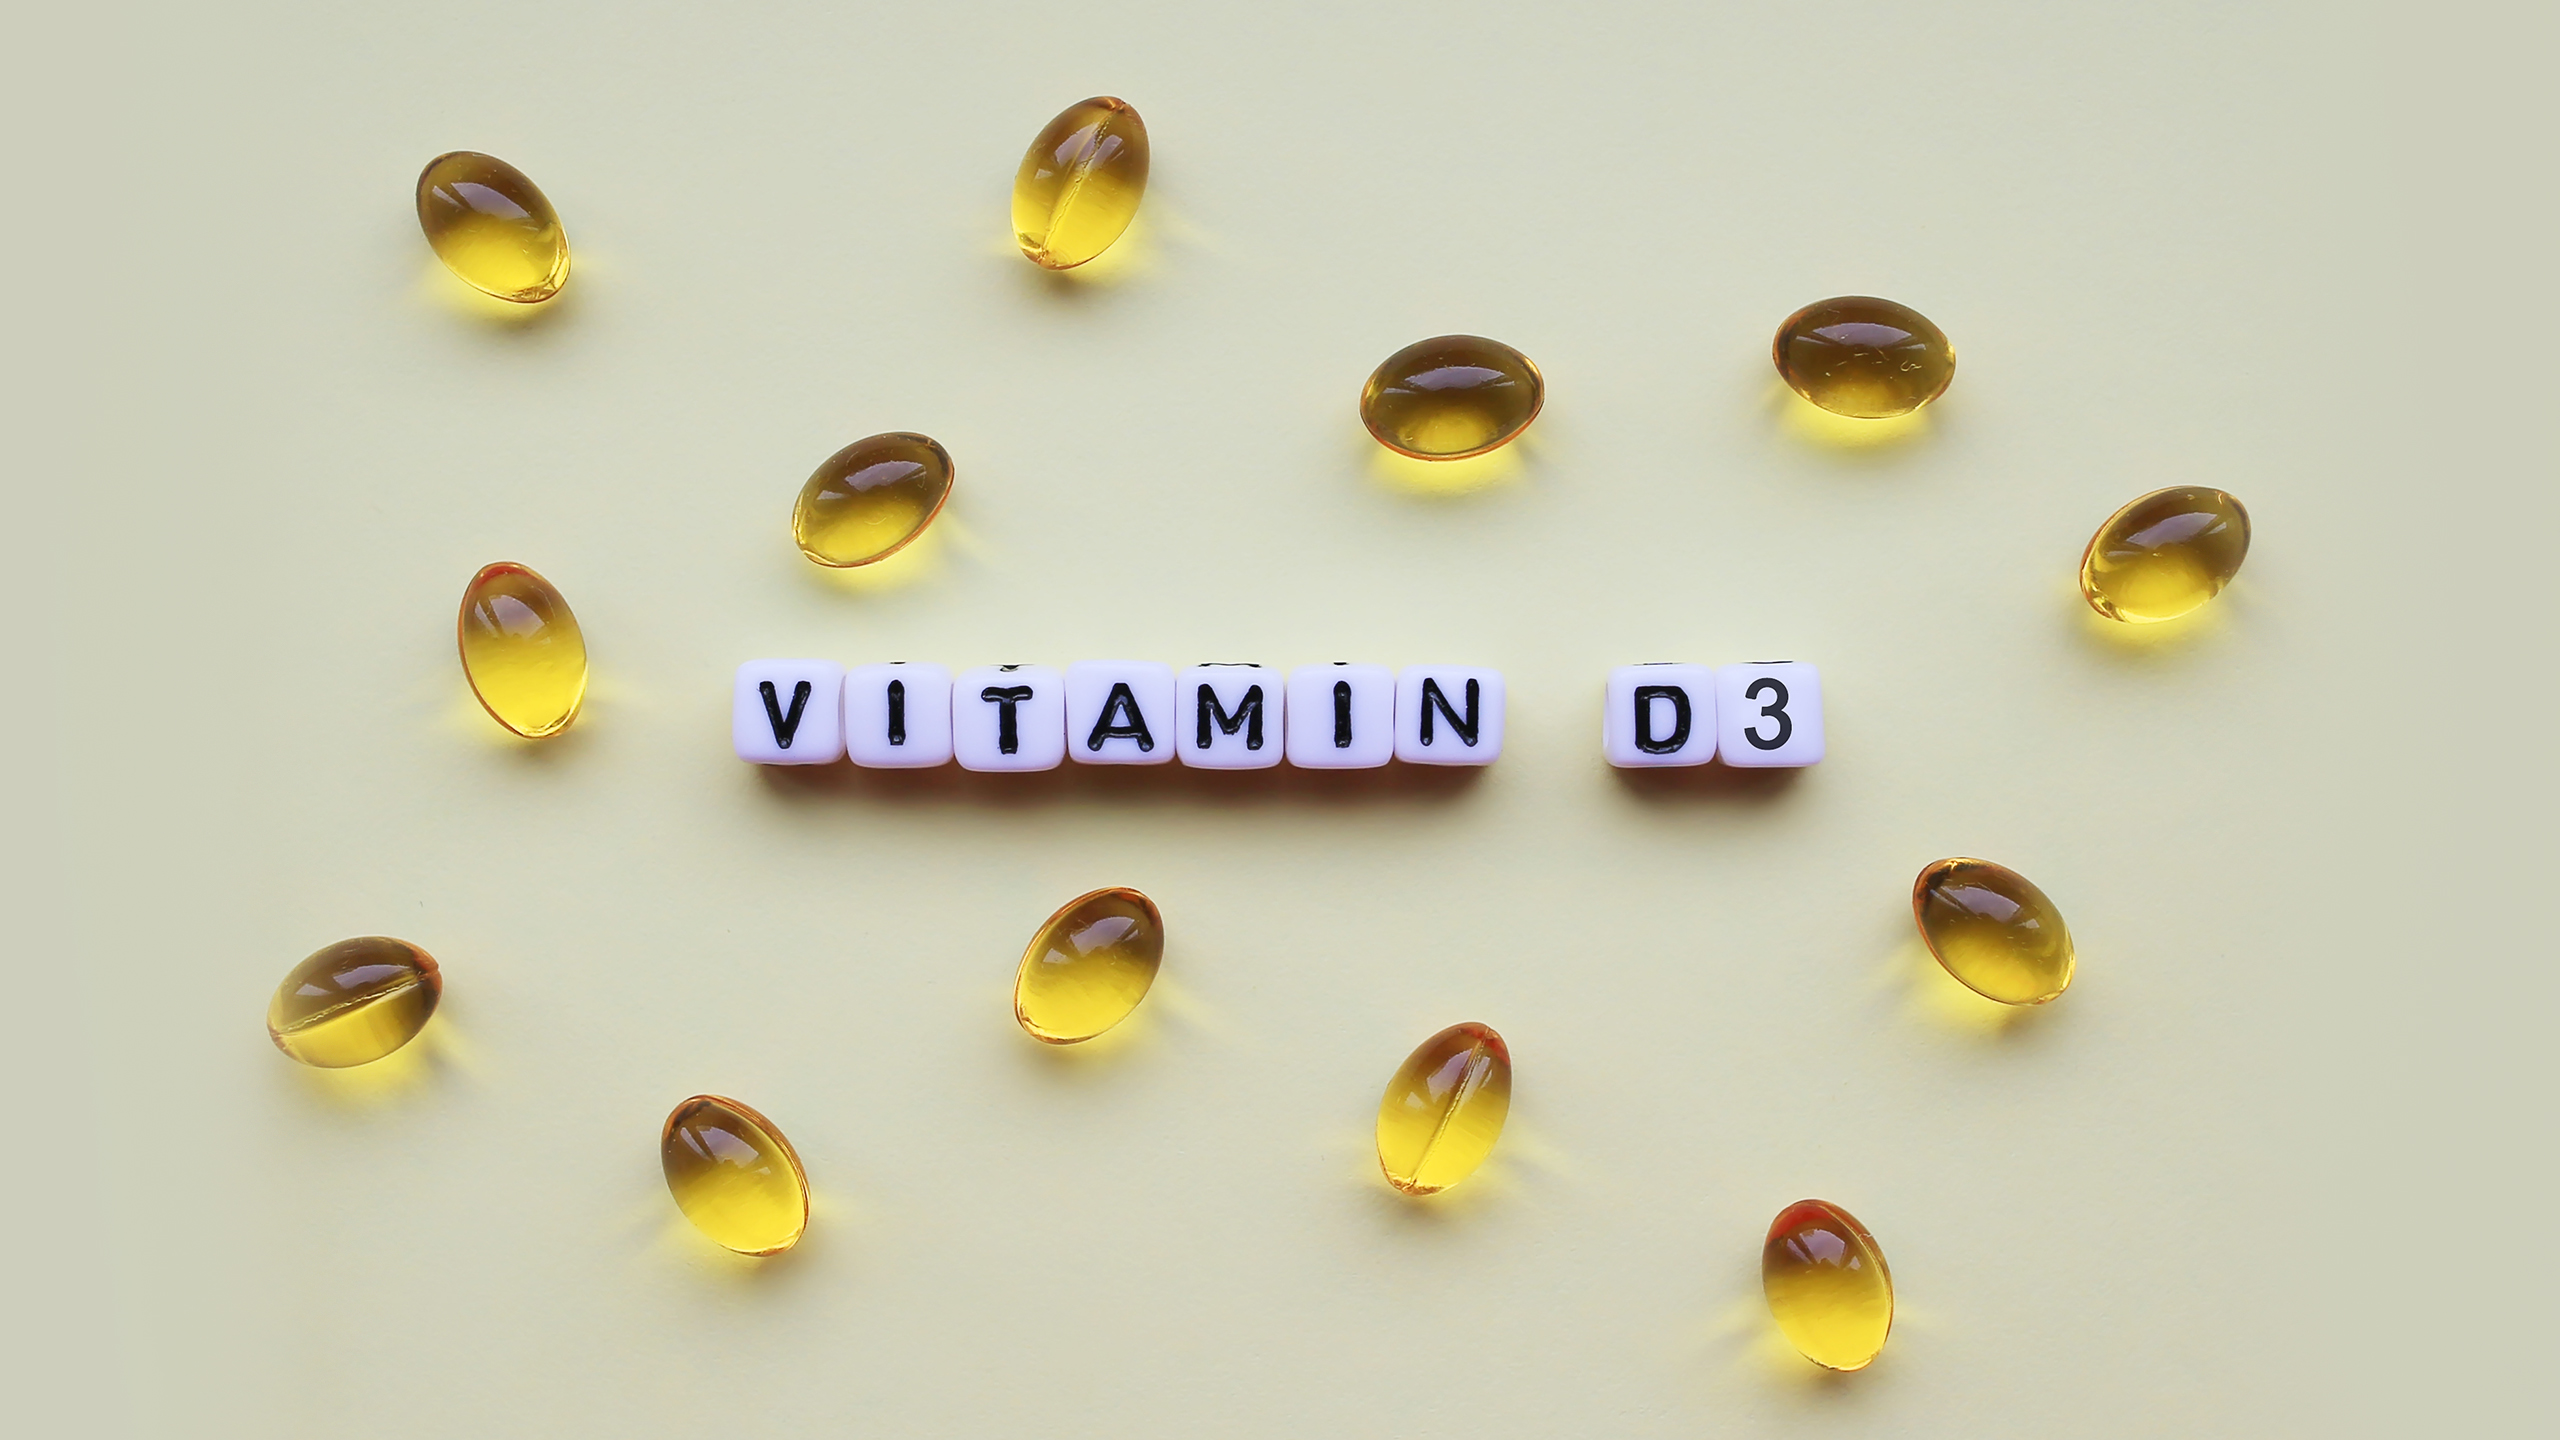 anti-ageing supplements vitamin d3